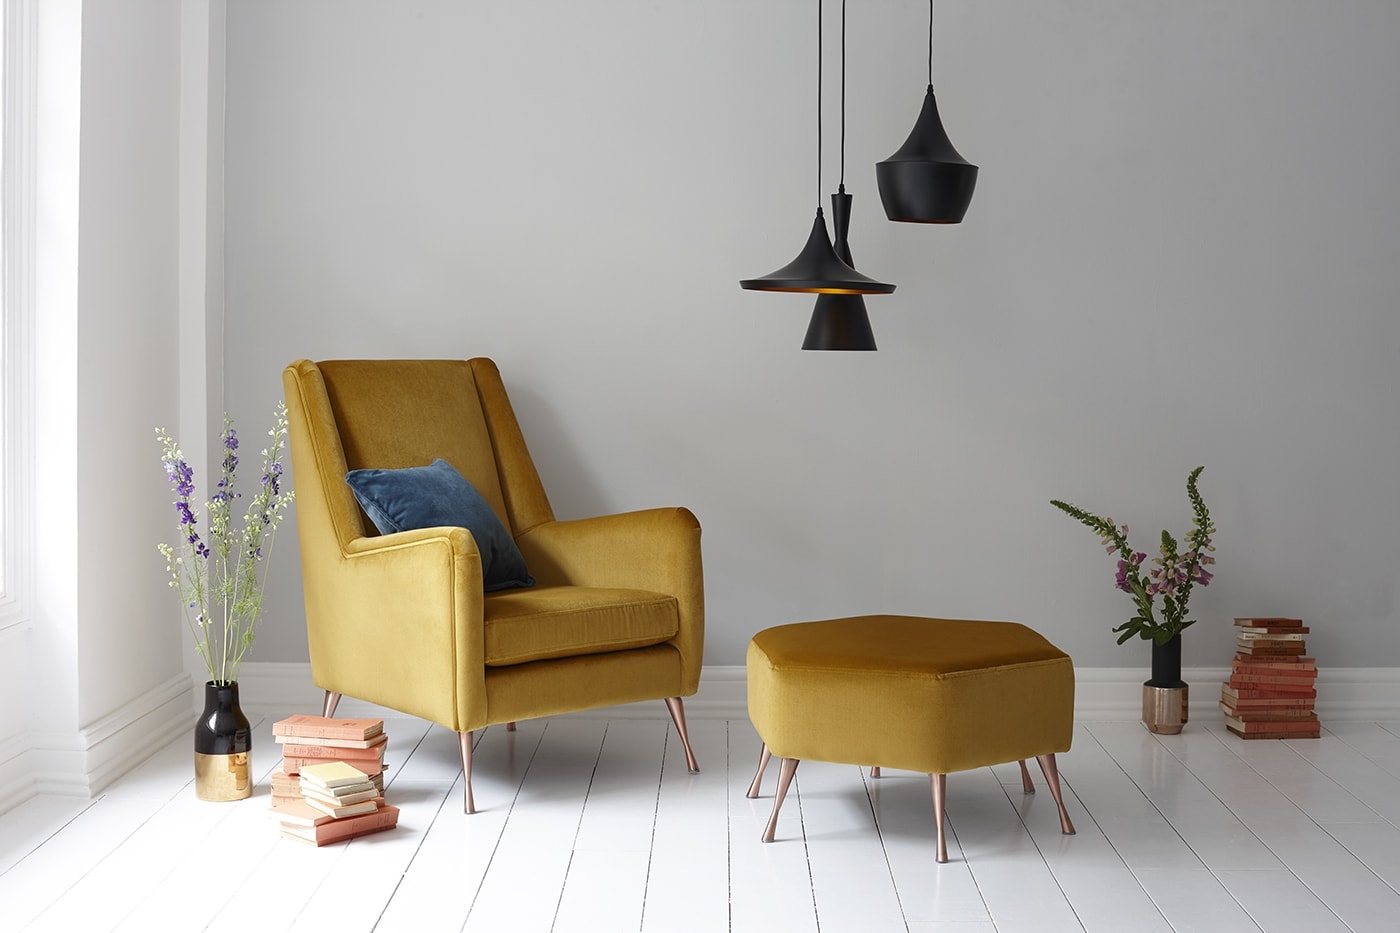 DFS Capsule Collection: Doing Stylish, Smaller